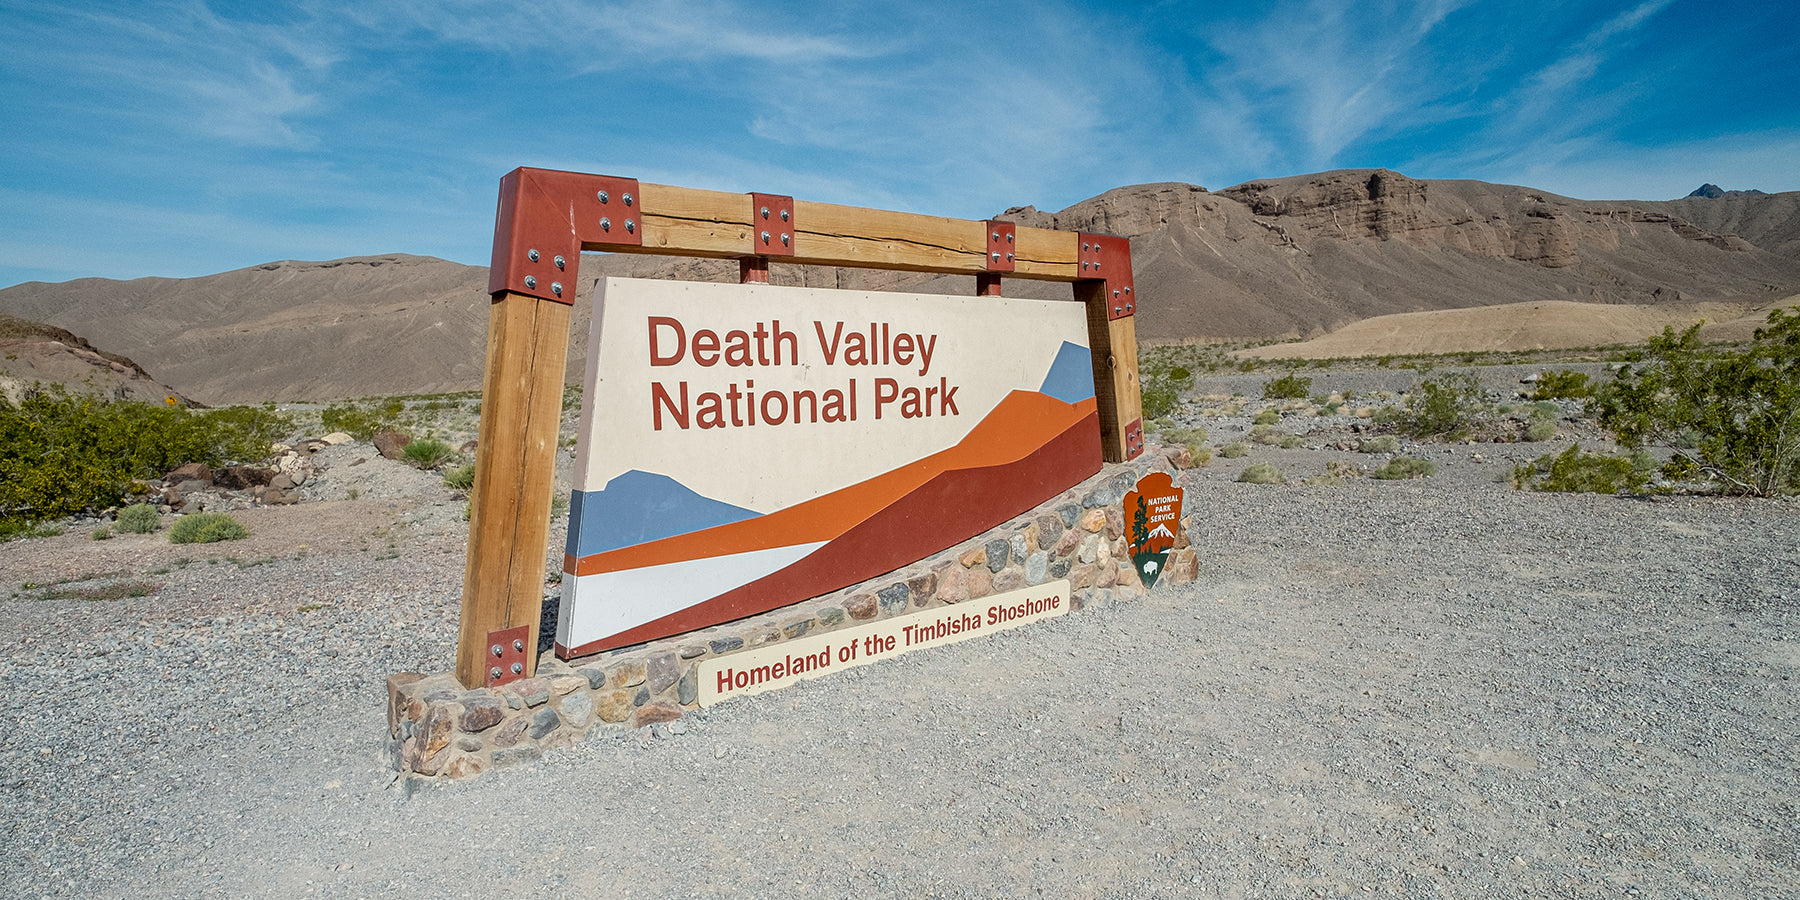 Travelogue: Planning a 2-Day Photo Trip to Death Valley